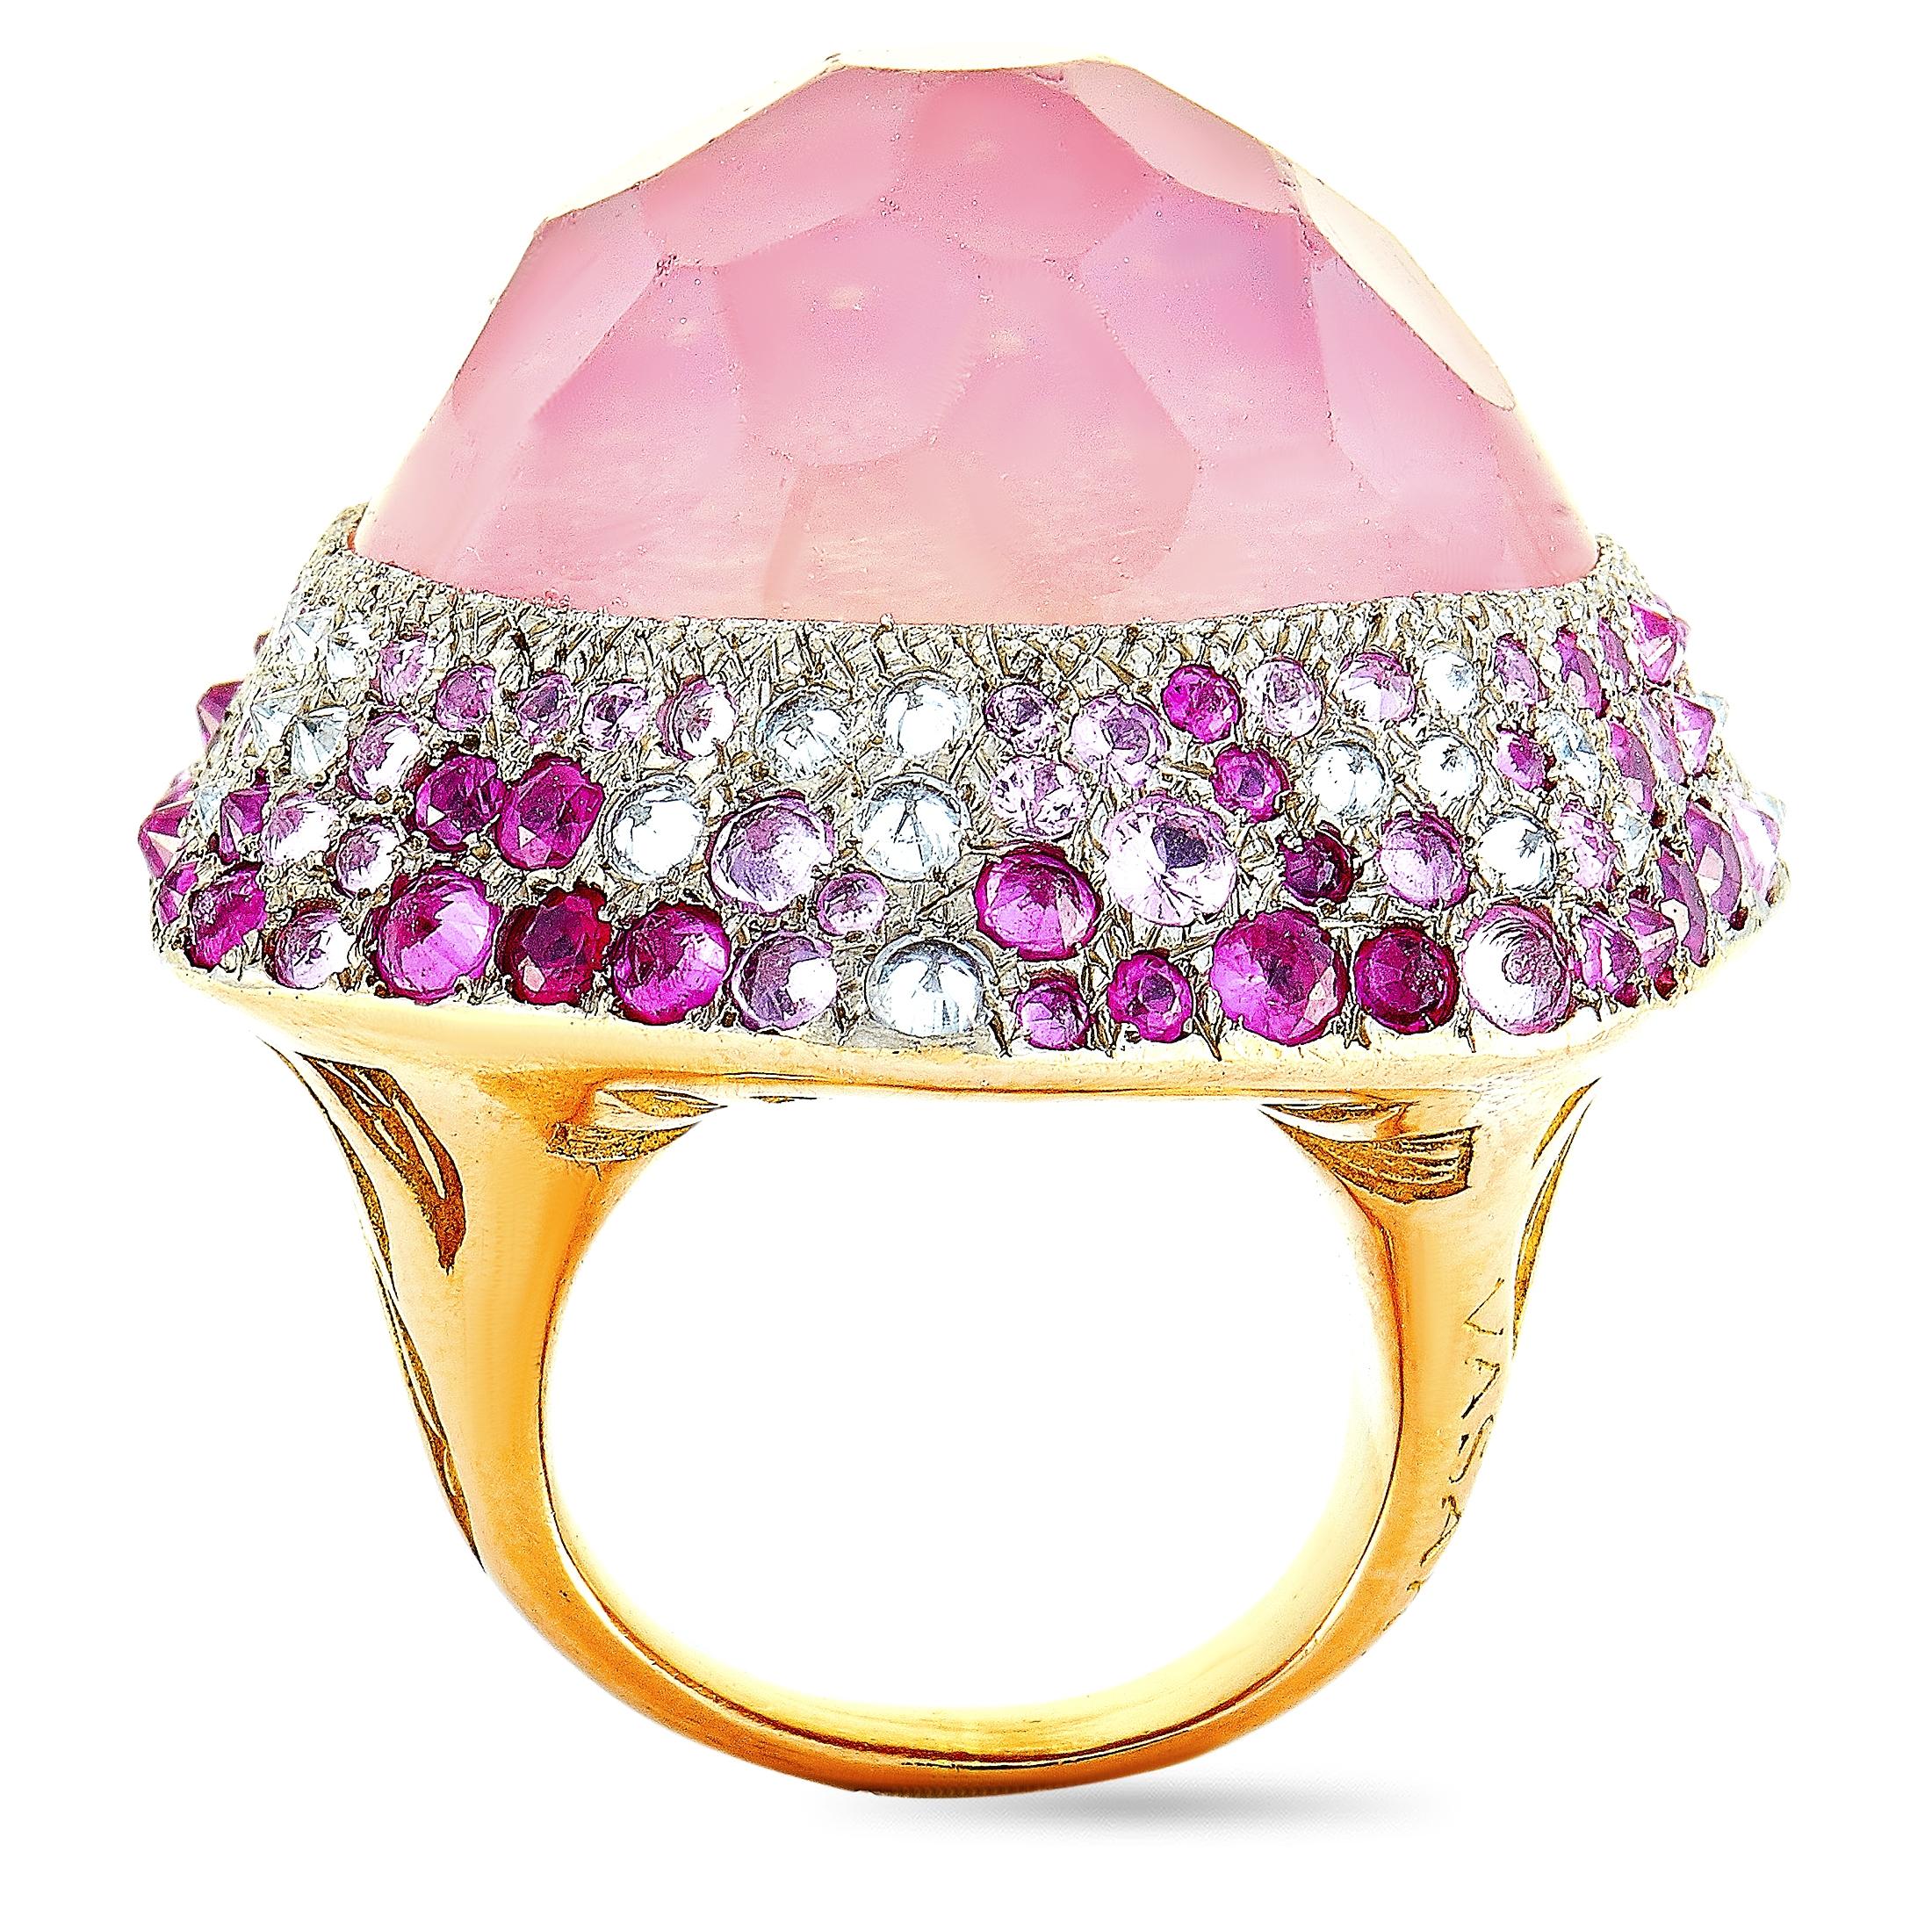 This Vasari ring is made of 18K rose gold and weighs 47.4 grams. It boasts band thickness of 4 mm and top height of 18 mm, while top dimensions measure 35 by 35 mm. The ring is set with a tourmaline, a total of 3.50 carats of rubies, and